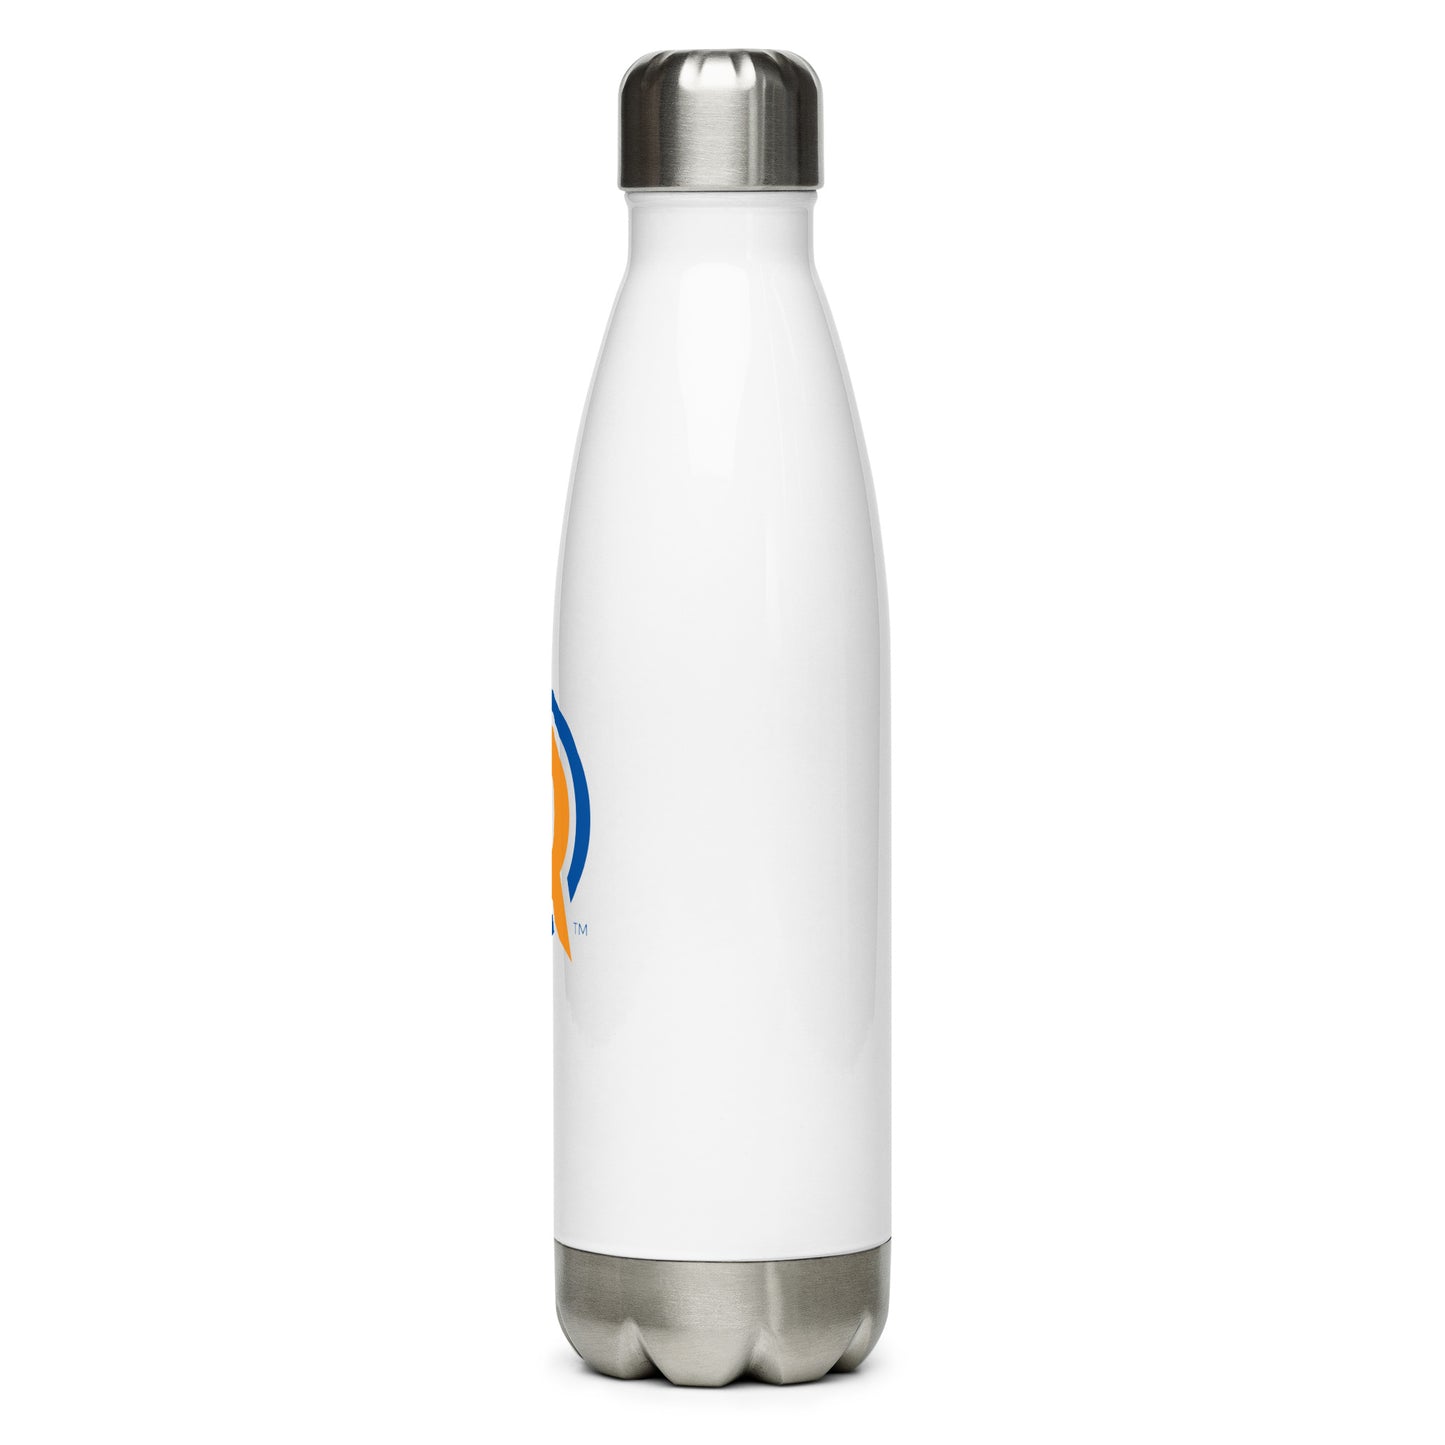 Yaqeen Q Water Bottle in White